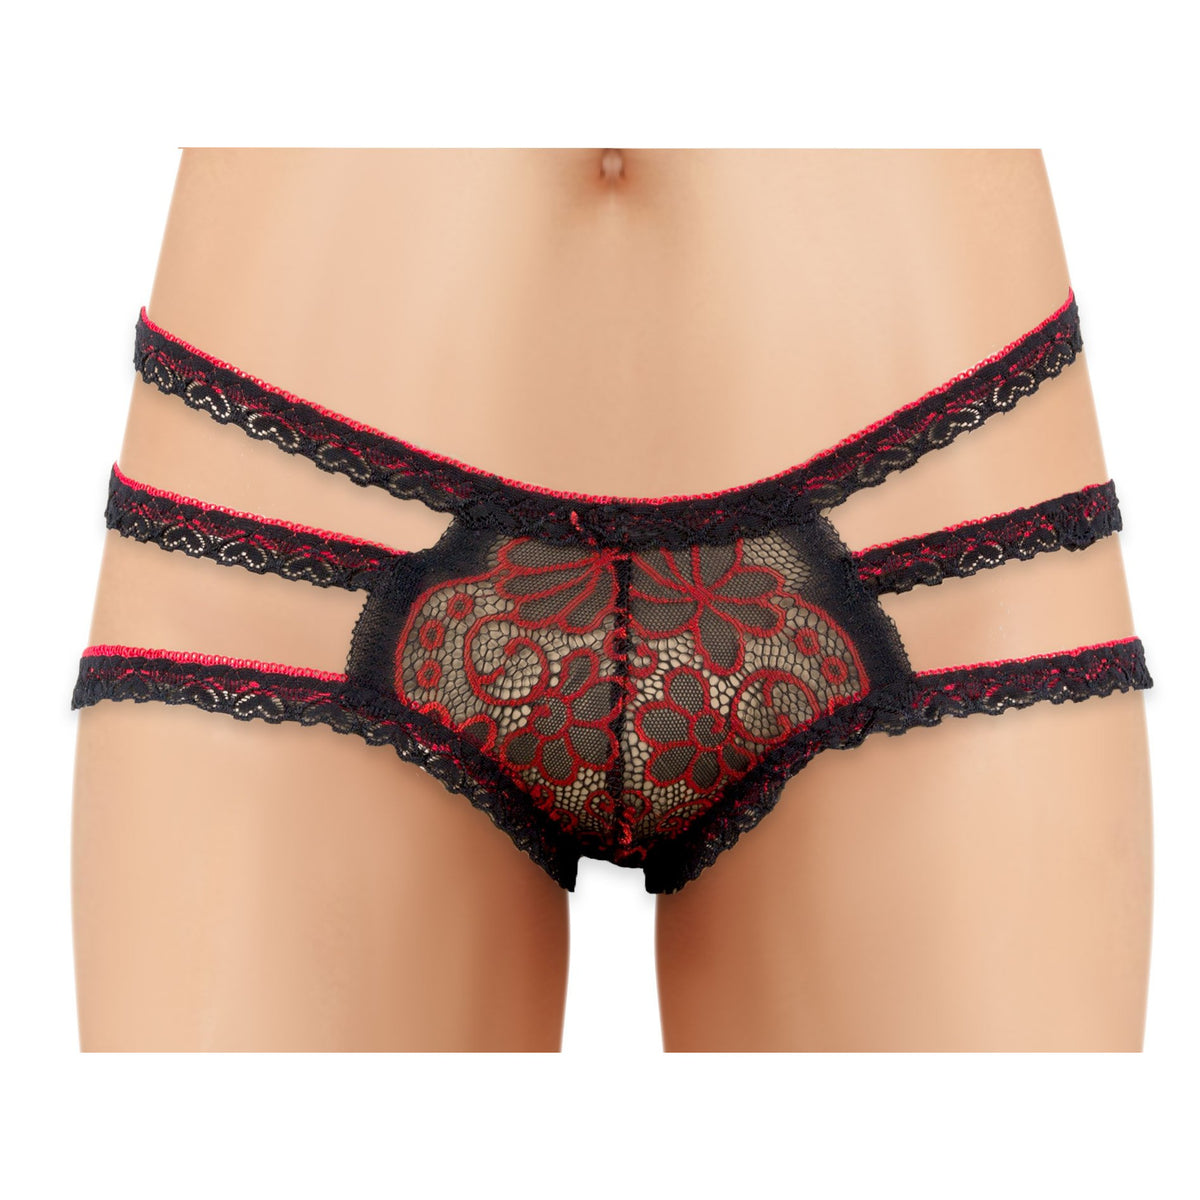 Cherry Wear Lace Panty with Floral Design - Red - O/S